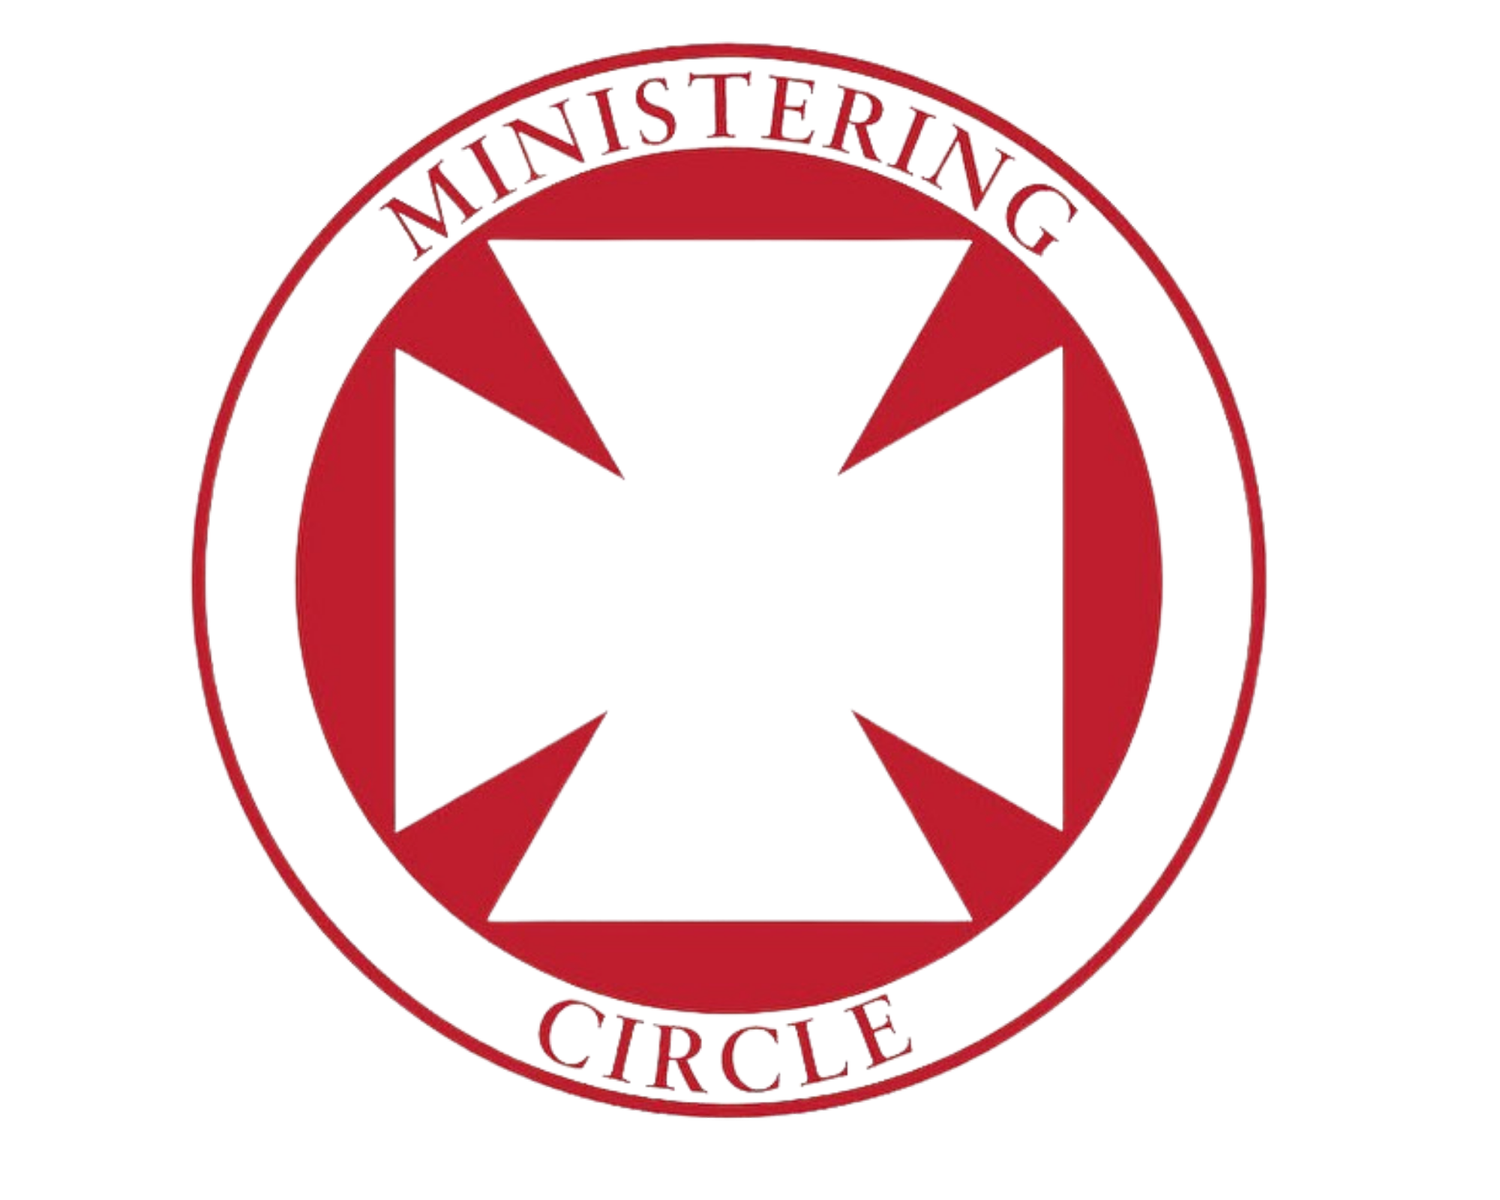 The Ministering Circle